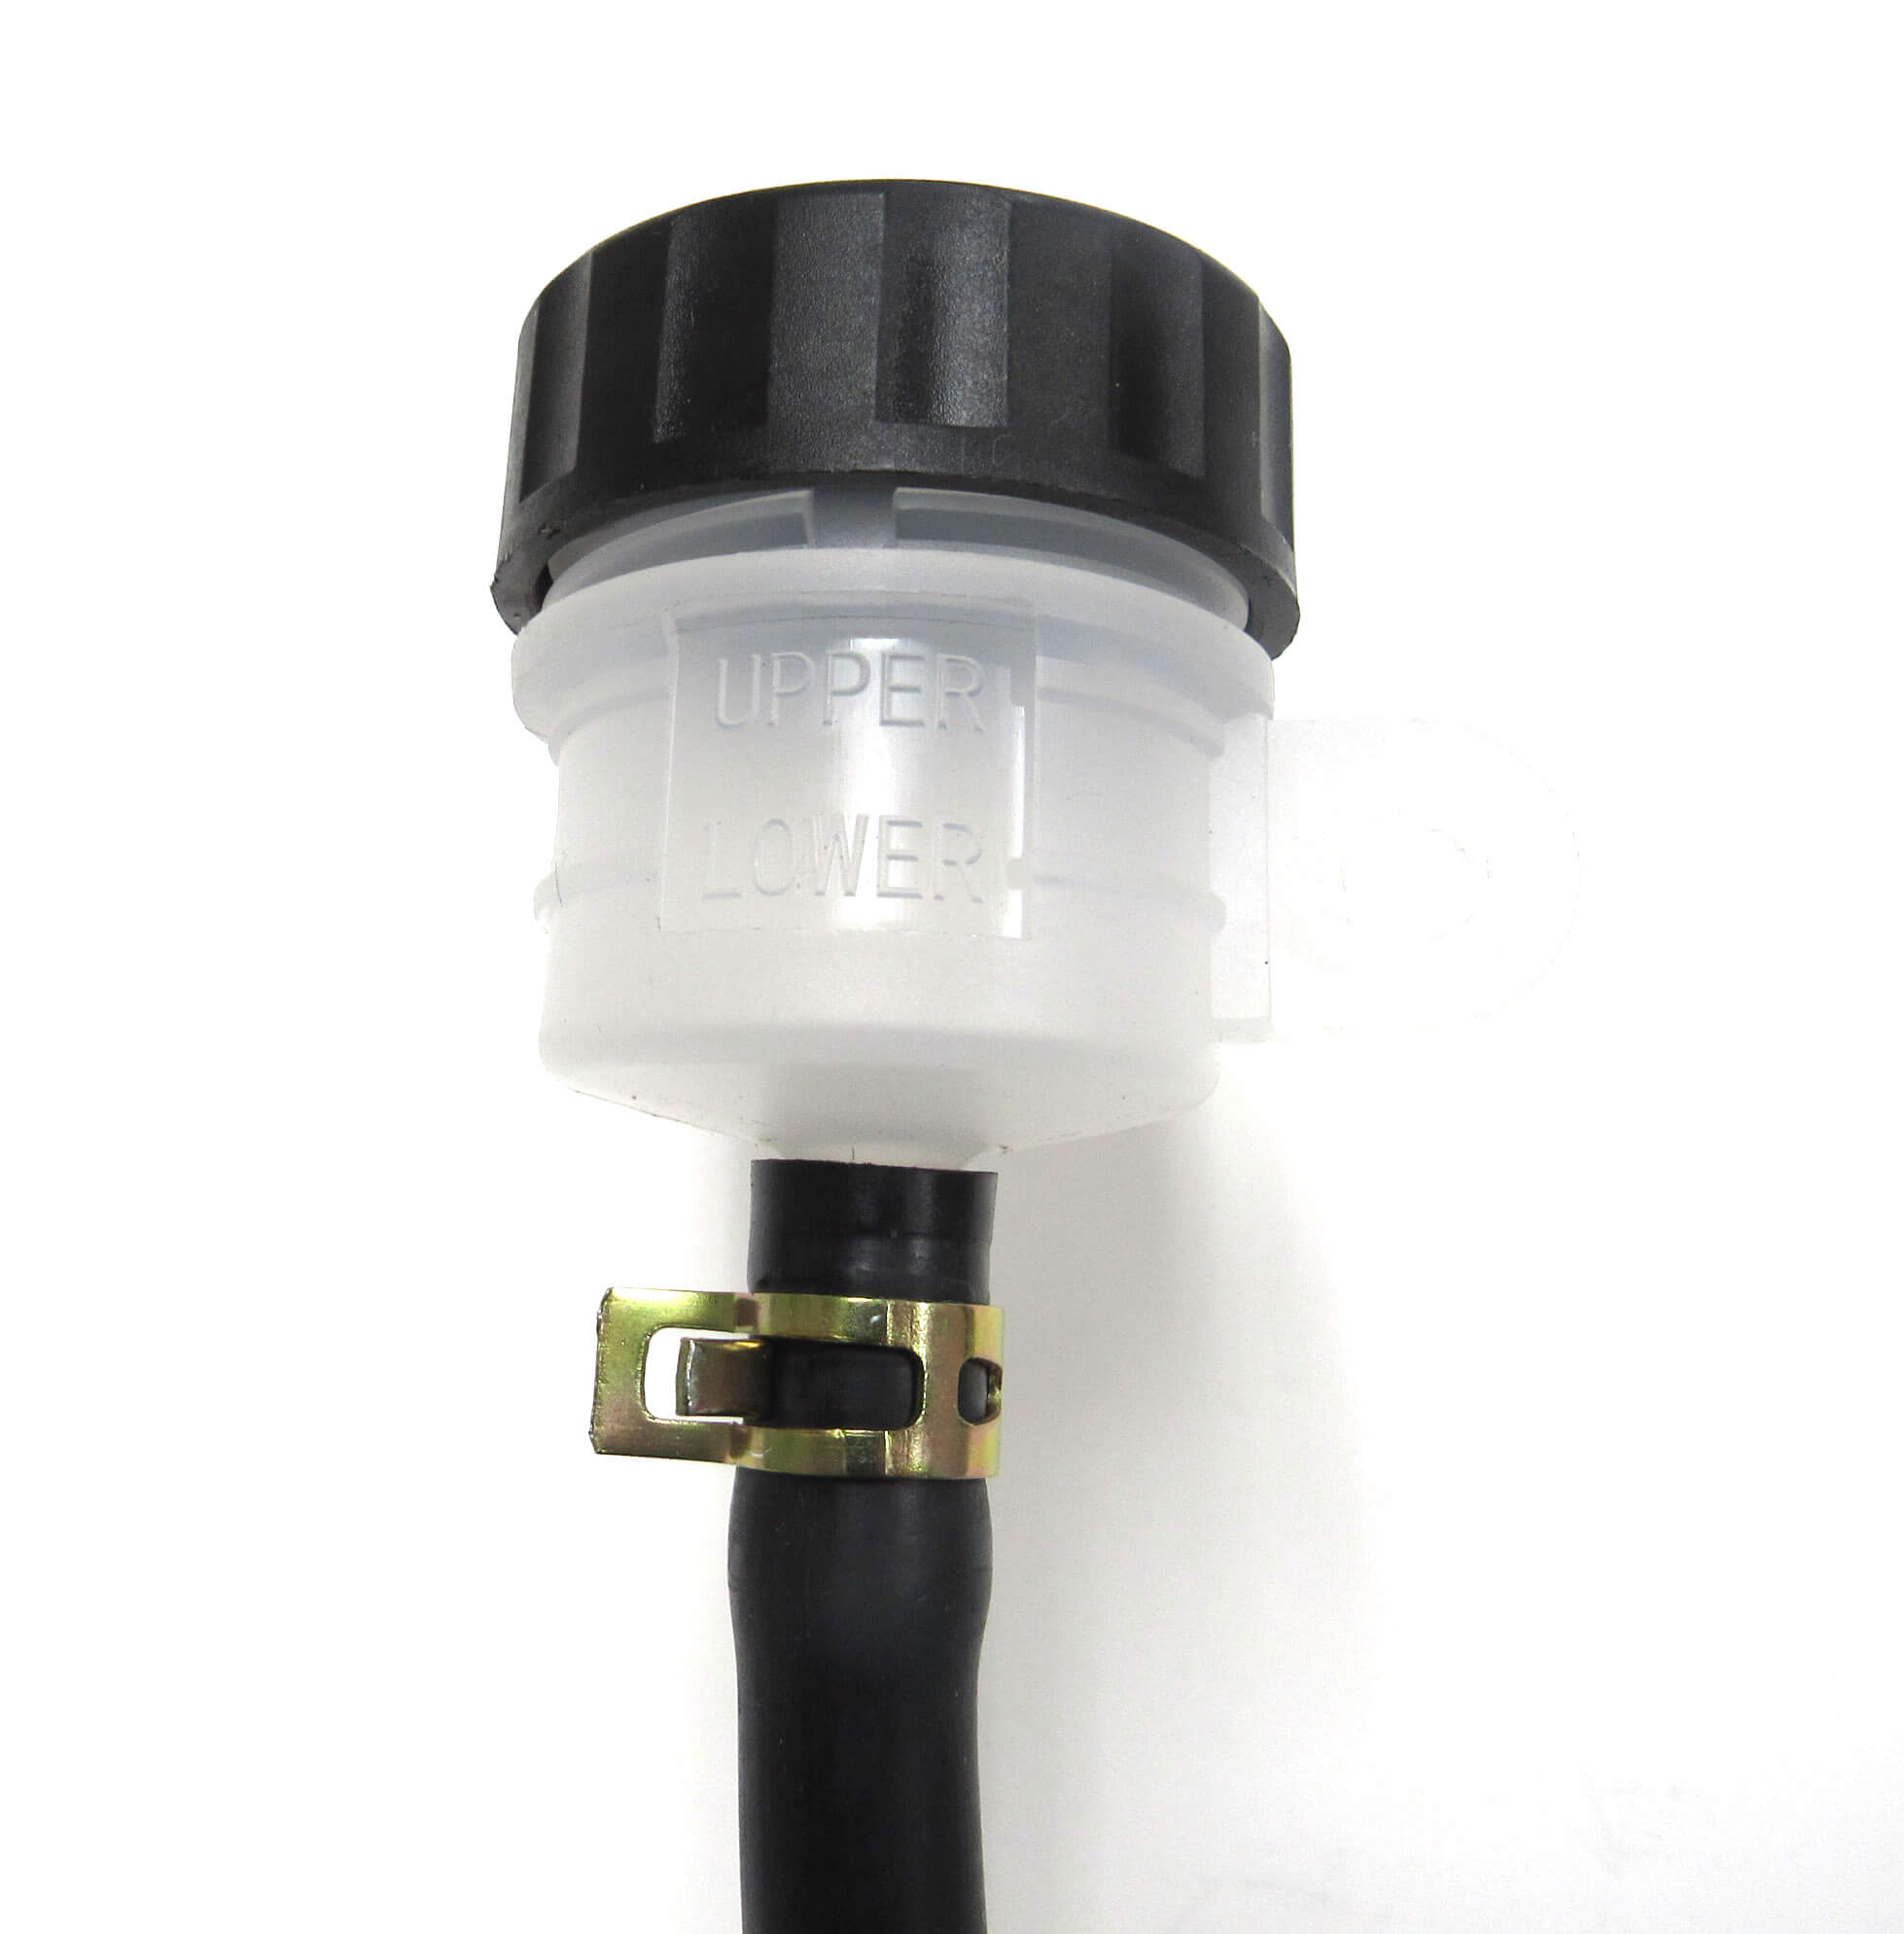 Brake Fluid Reservoir Fits Many ATVs, Go Karts and Motorcycles with Foot Brakes - Click Image to Close